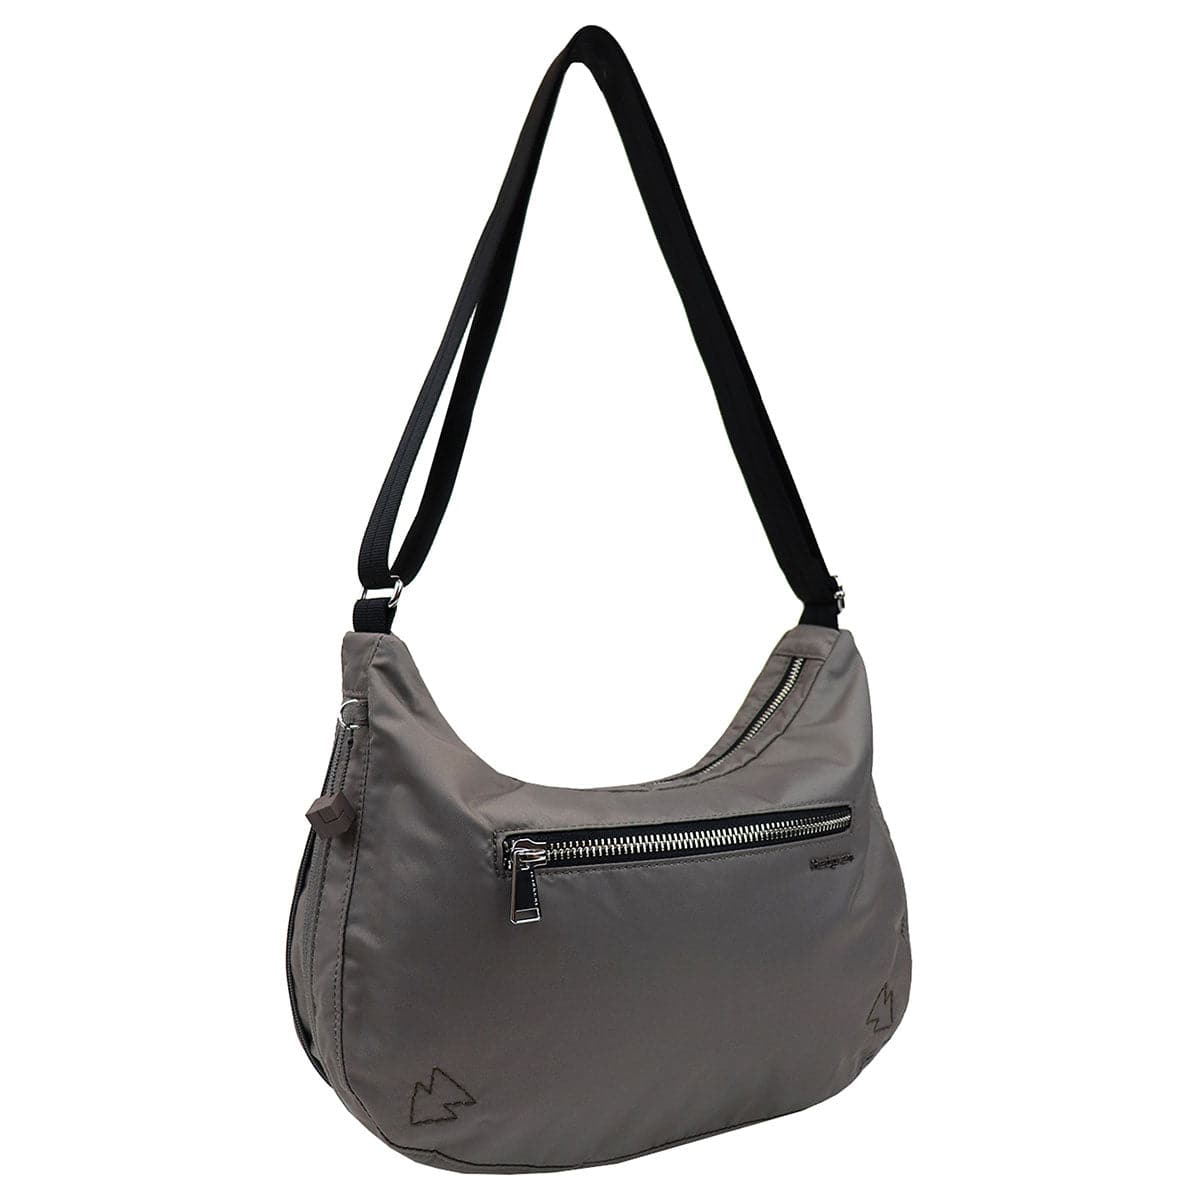 Hedgren Ann Sustainably Made Expandable Hobo Bag